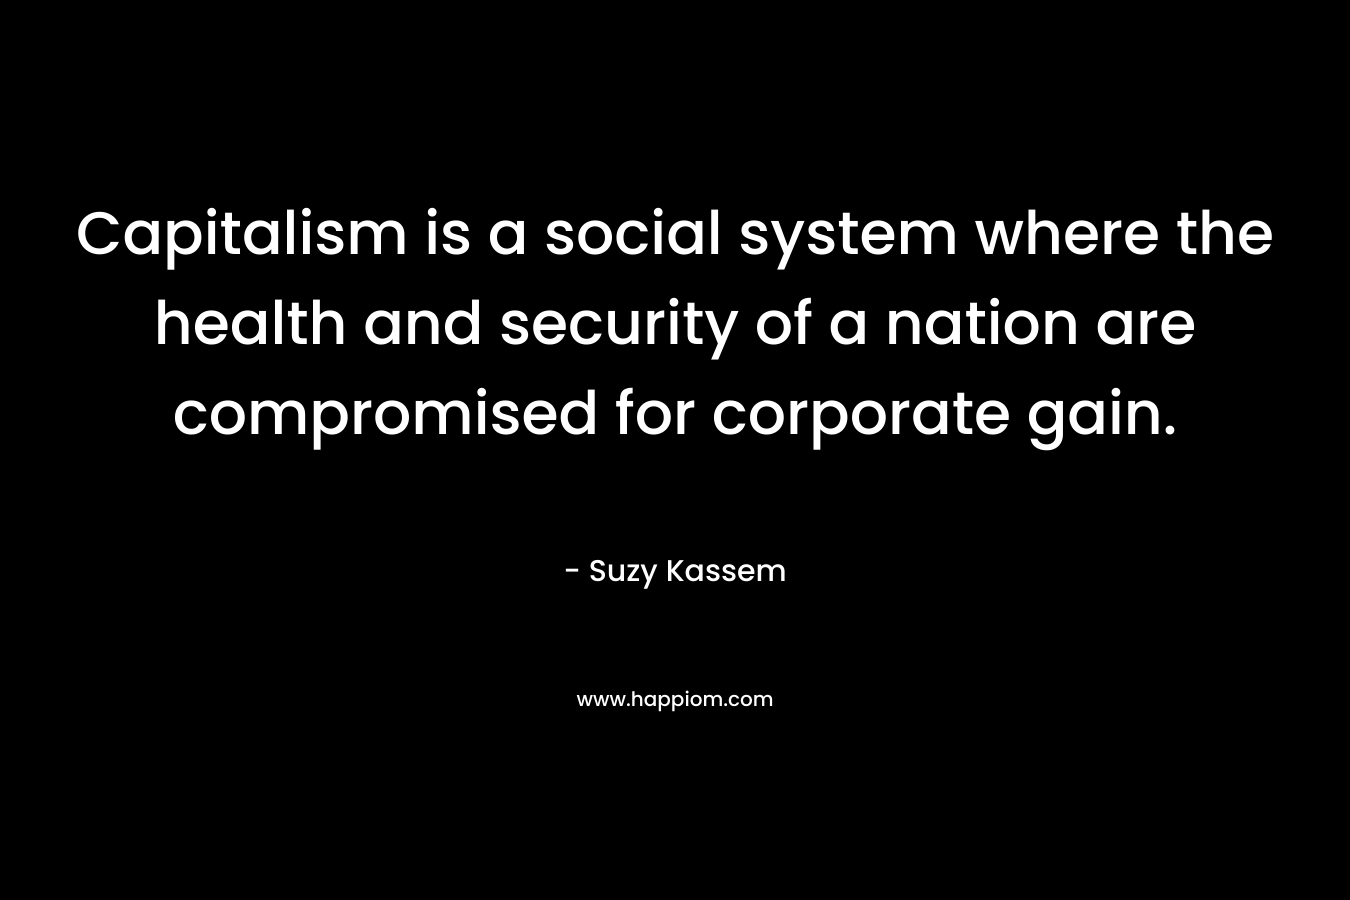 Capitalism is a social system where the health and security of a nation are compromised for corporate gain. – Suzy Kassem